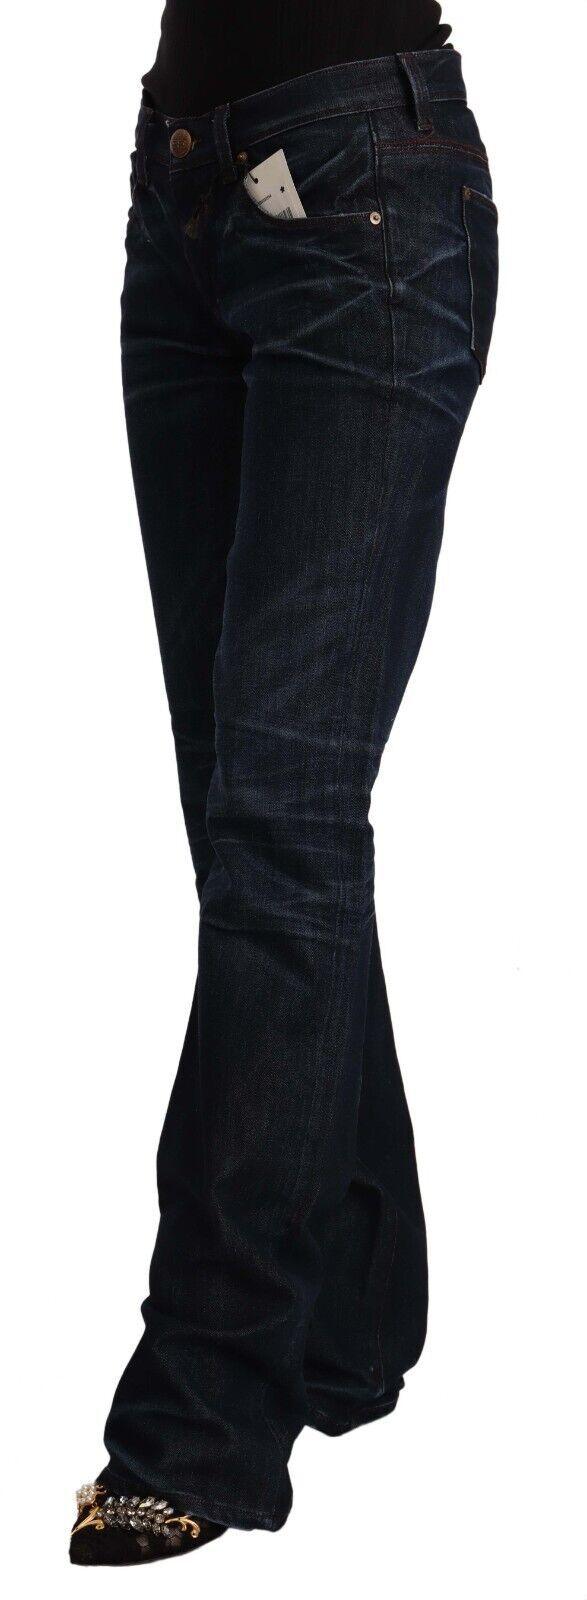 Dark Blue Mid Waist Cotton Denim Straight Jeans - Designed by Ermanno Scervino Available to Buy at a Discounted Price on Moon Behind The Hill Online Designer Discount Store